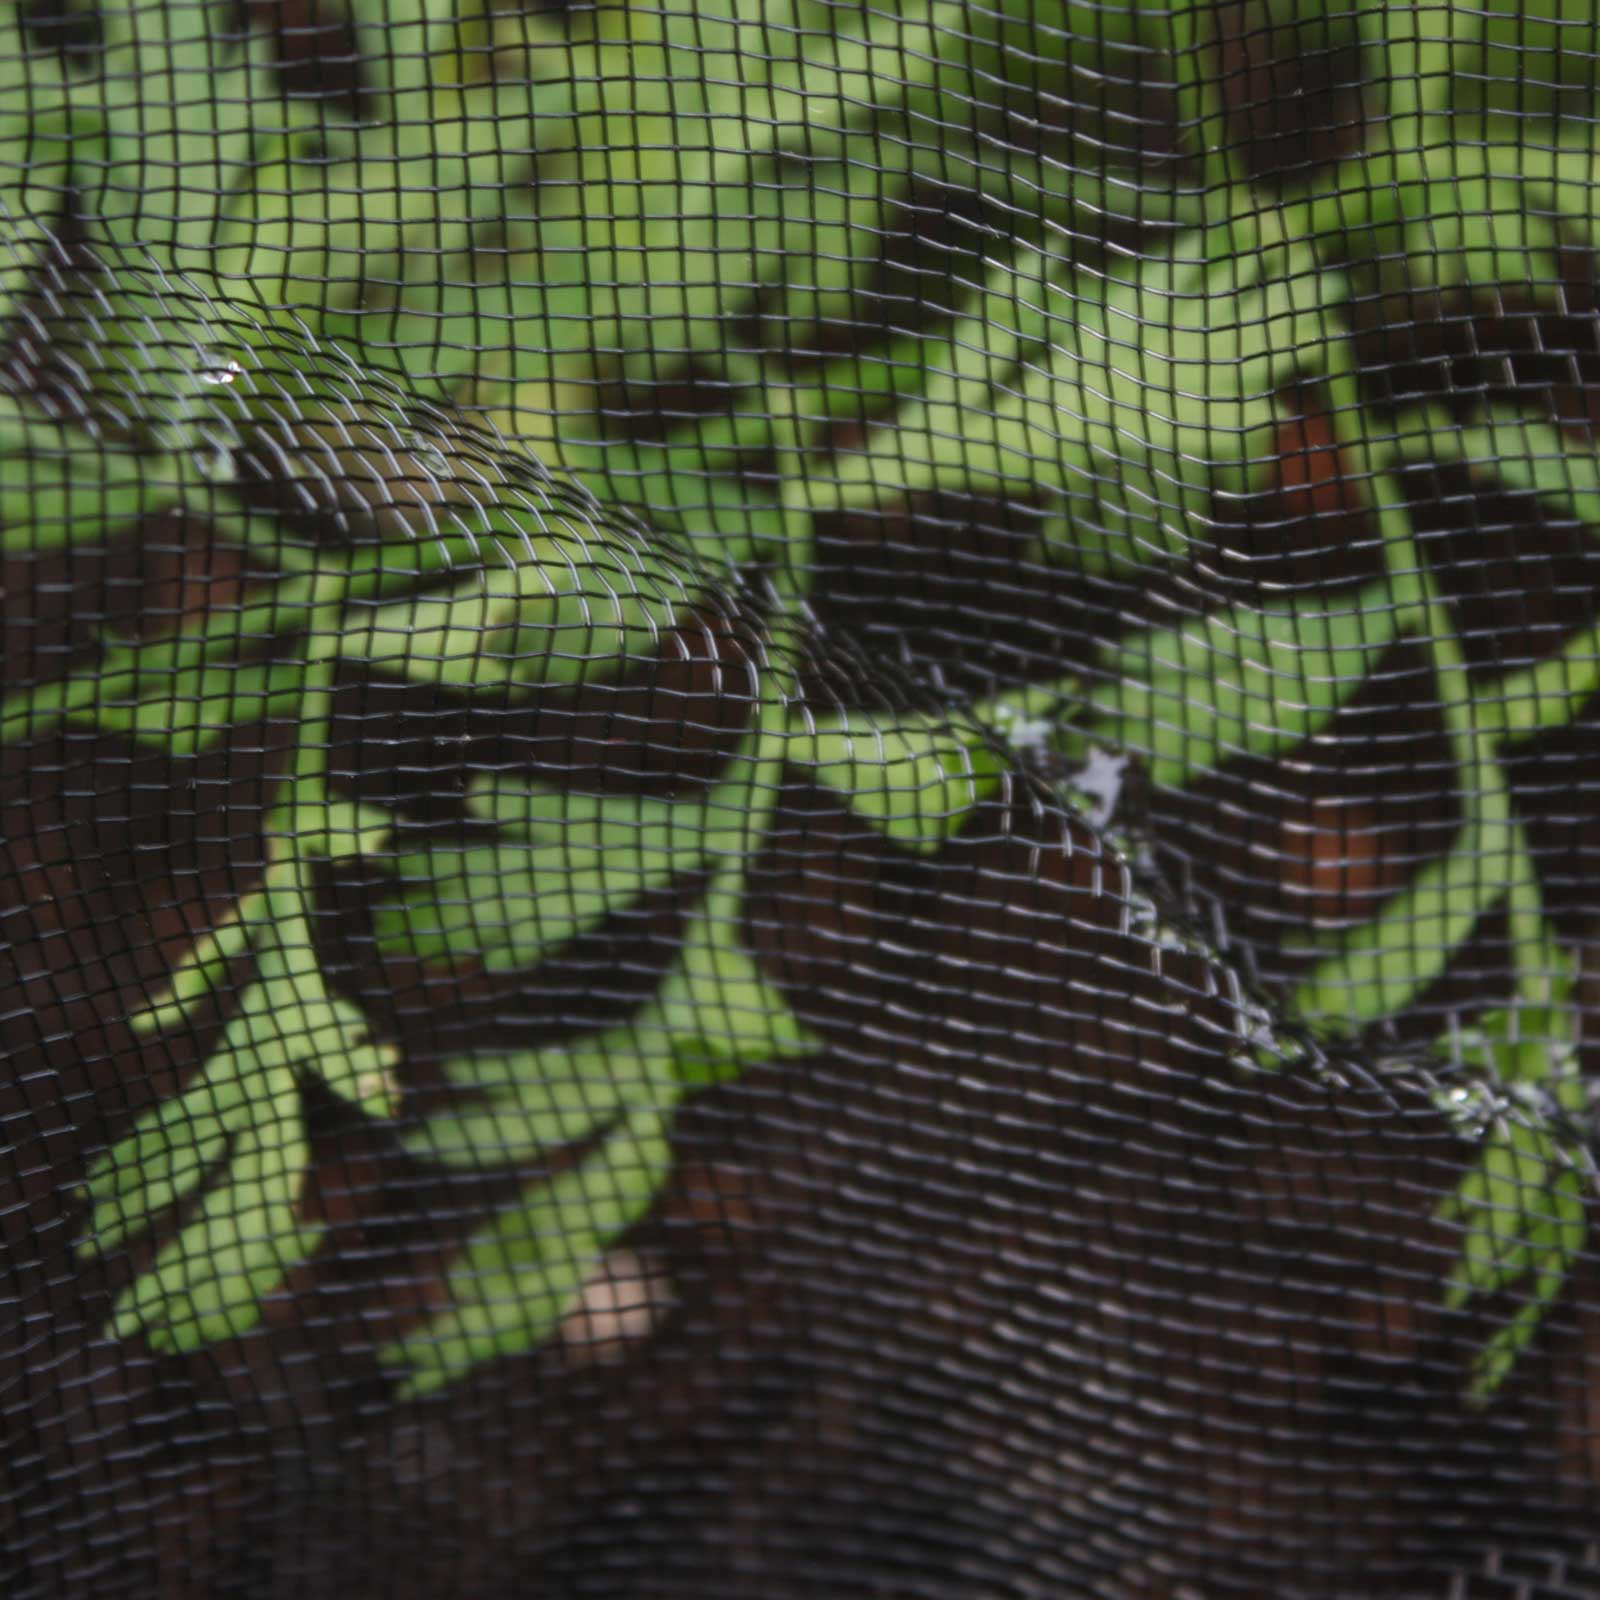 Black Insect Mesh Netting